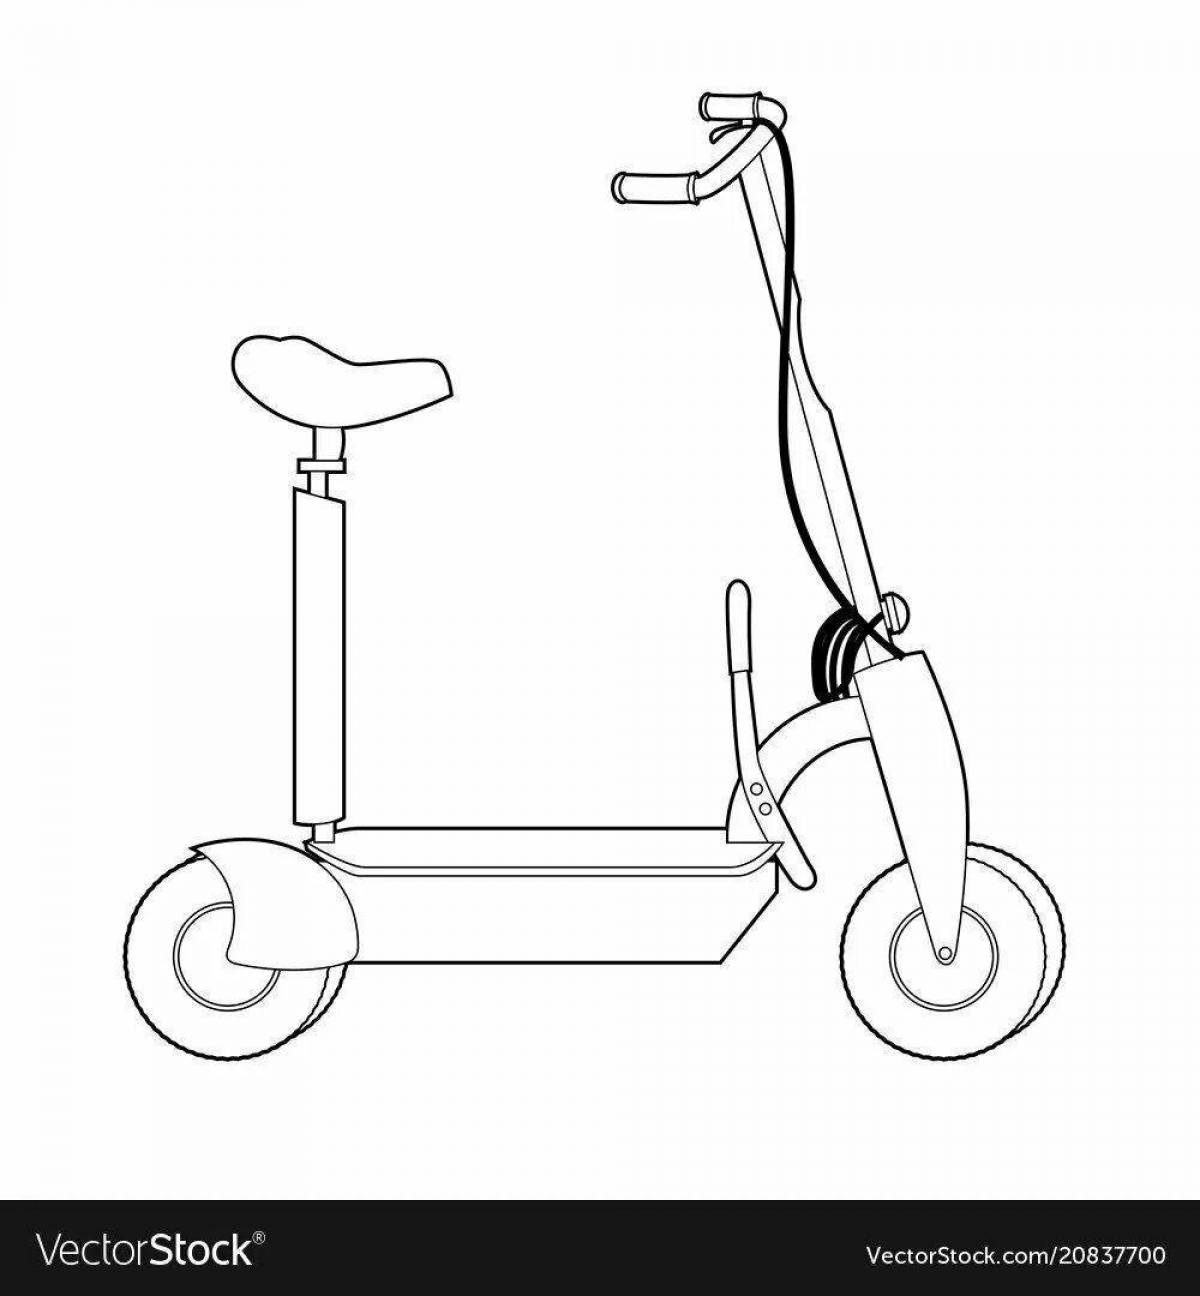 Charming scooter coloring book for kids